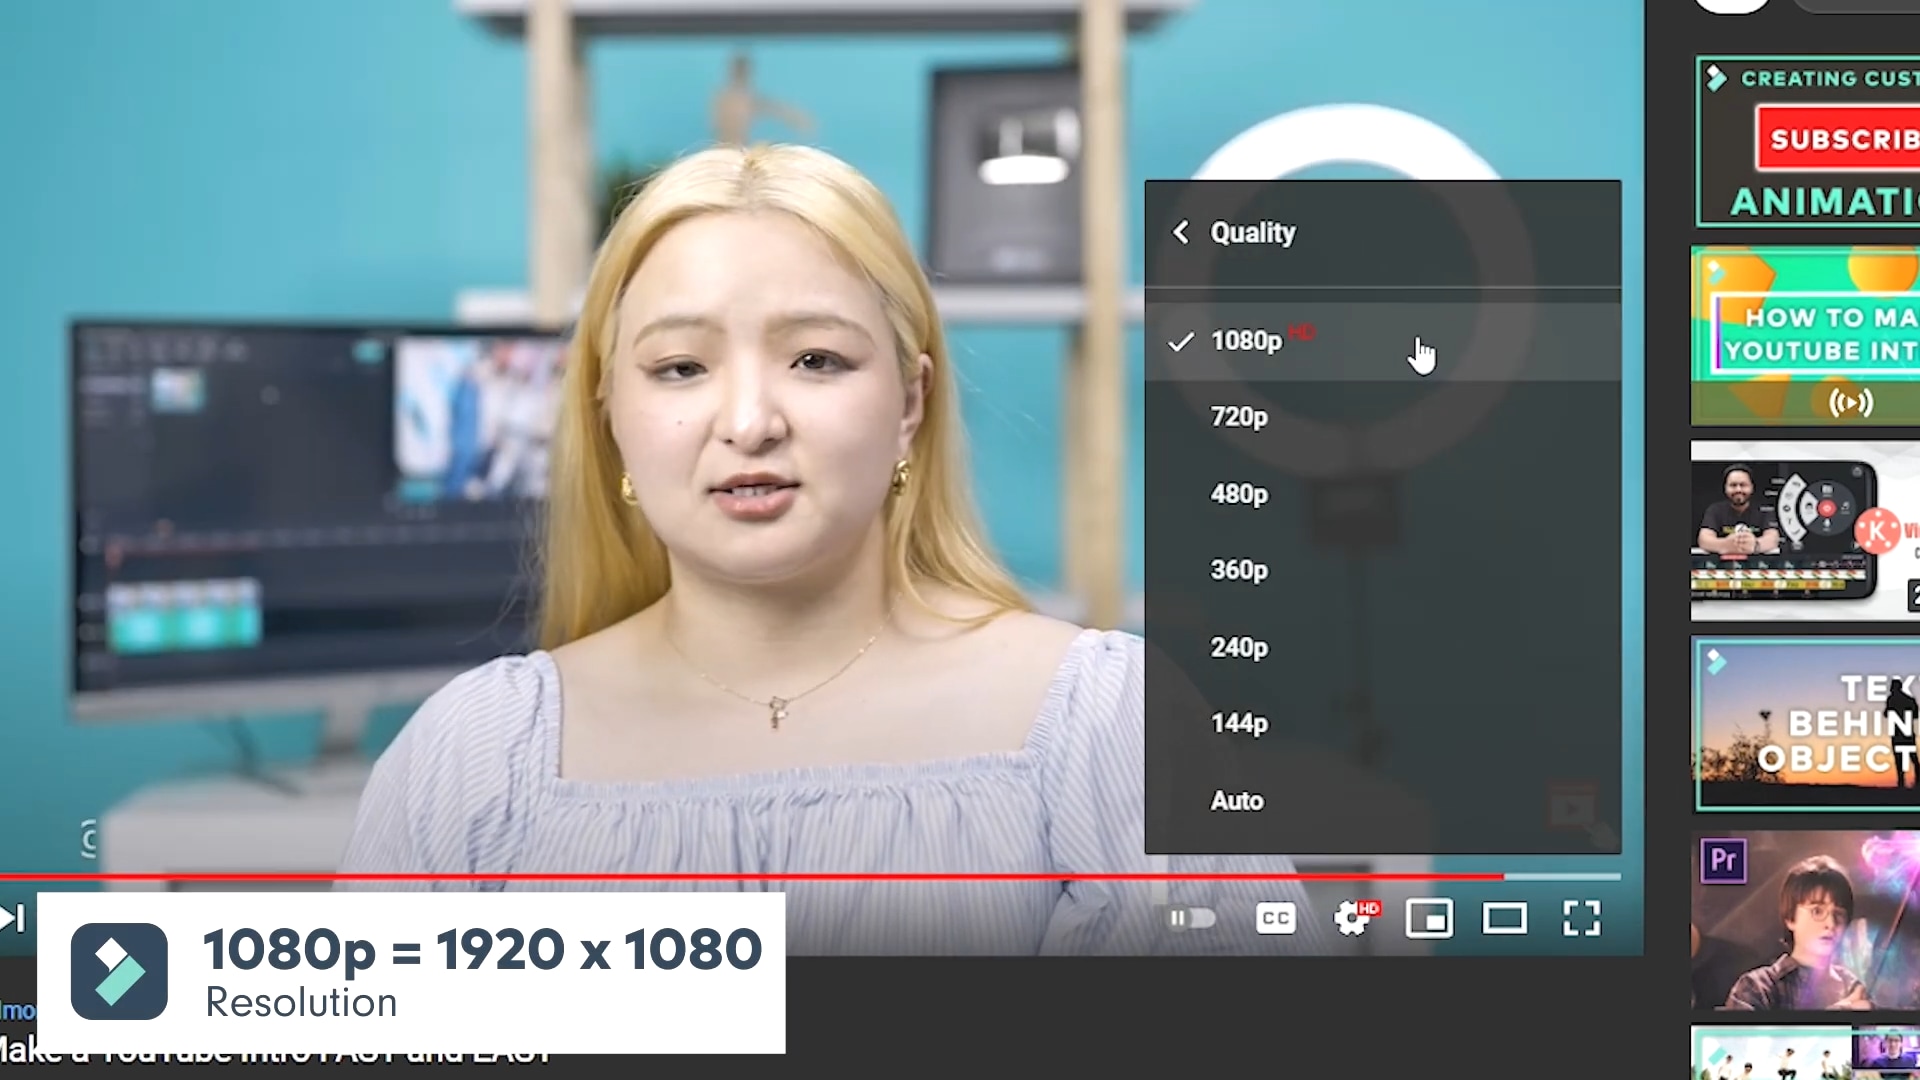 a youtube video in fhd resolution